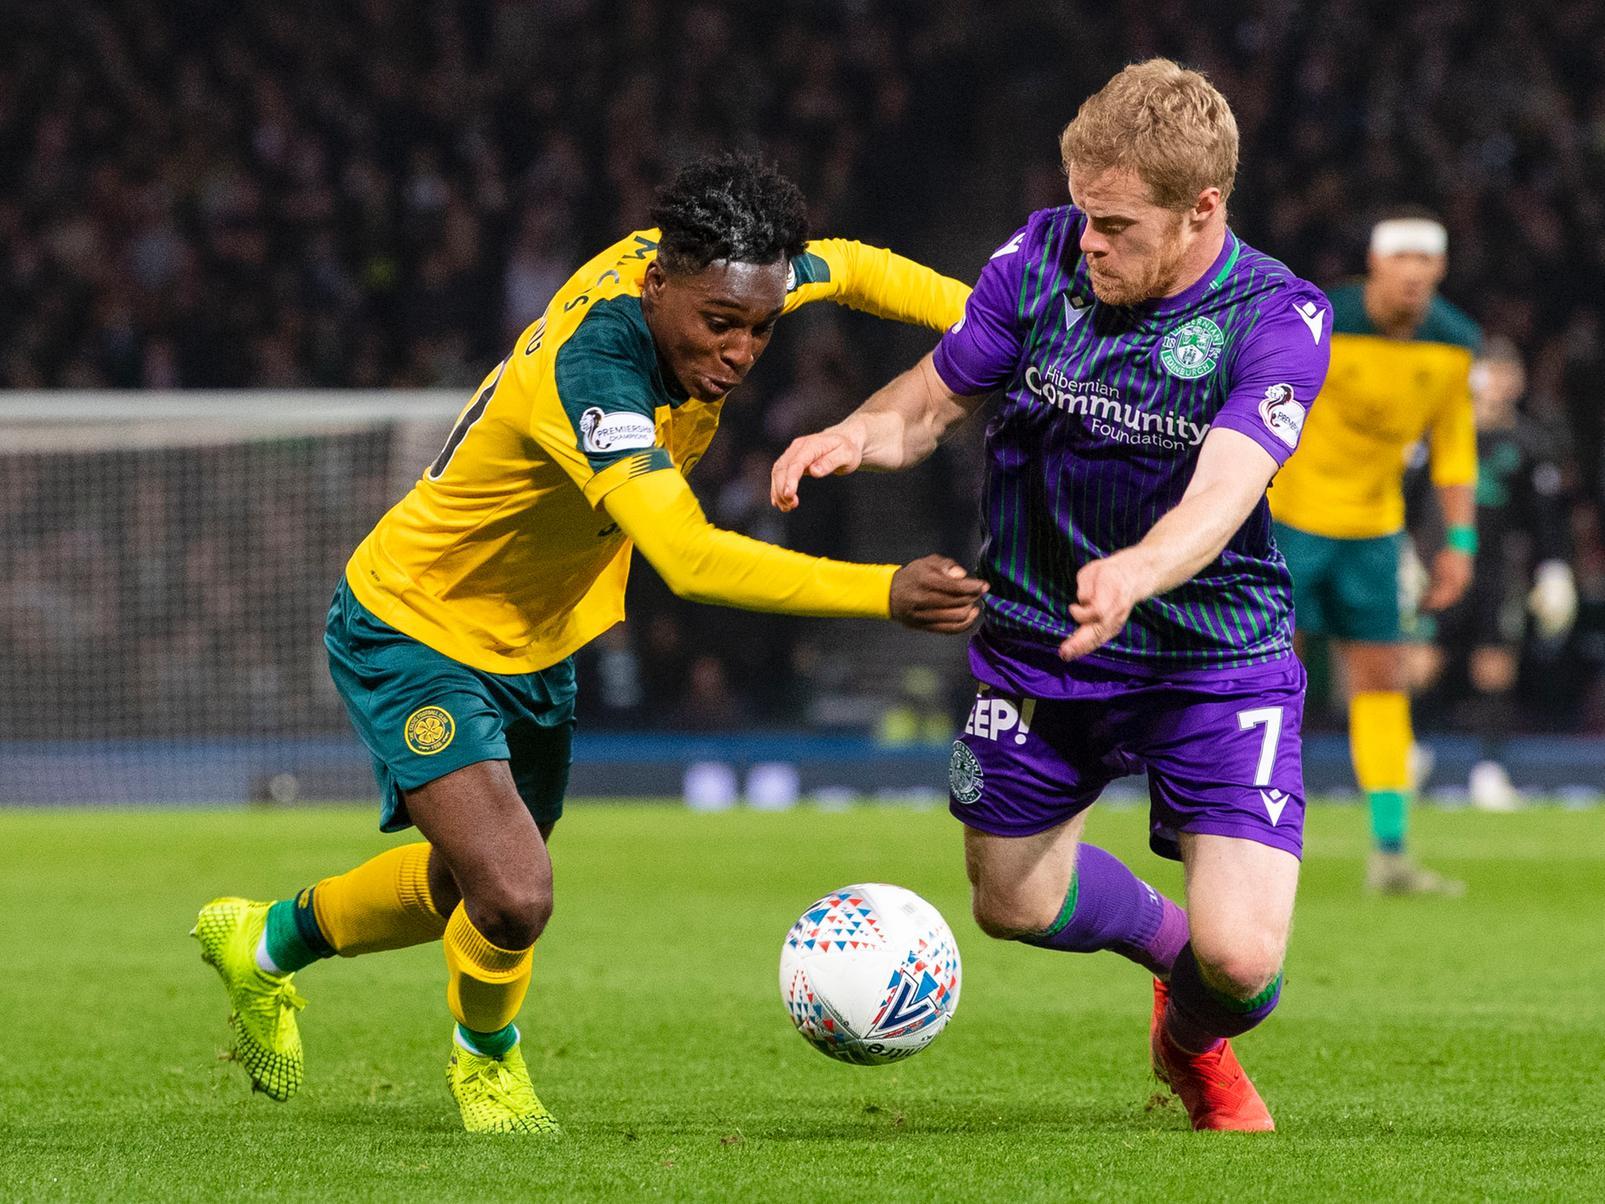 One of Hibs better performers. Had ambition to get forward, nearly scored early on and tracked Jeremie Frimpong reasonably well and gave Lewis Stevenson a semblance of protection.